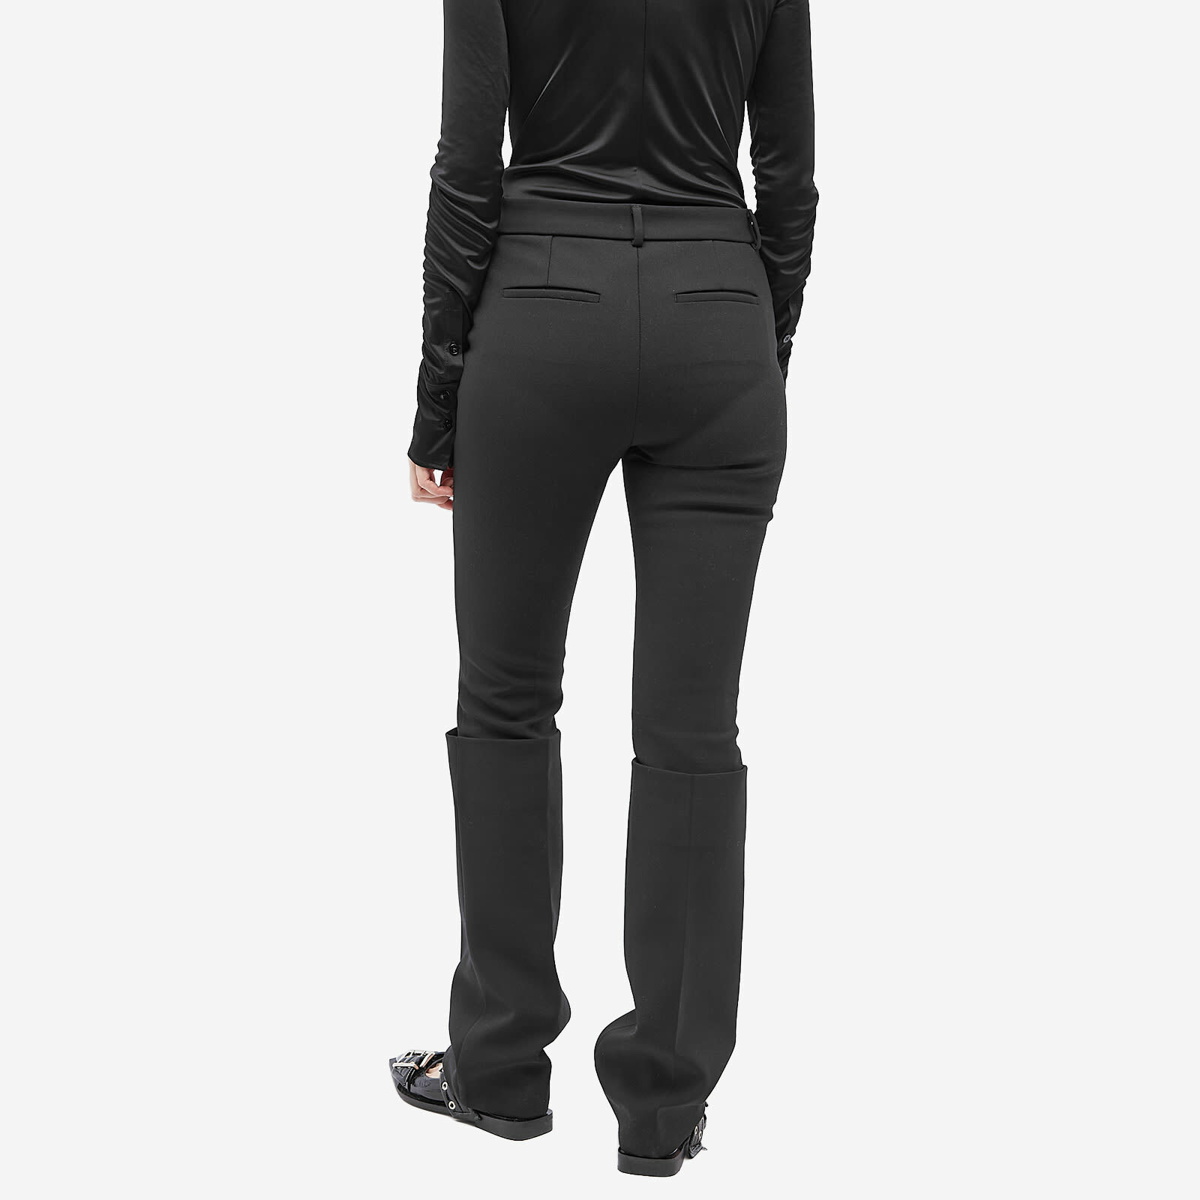 Black Flared Trousers by Sportmax on Sale